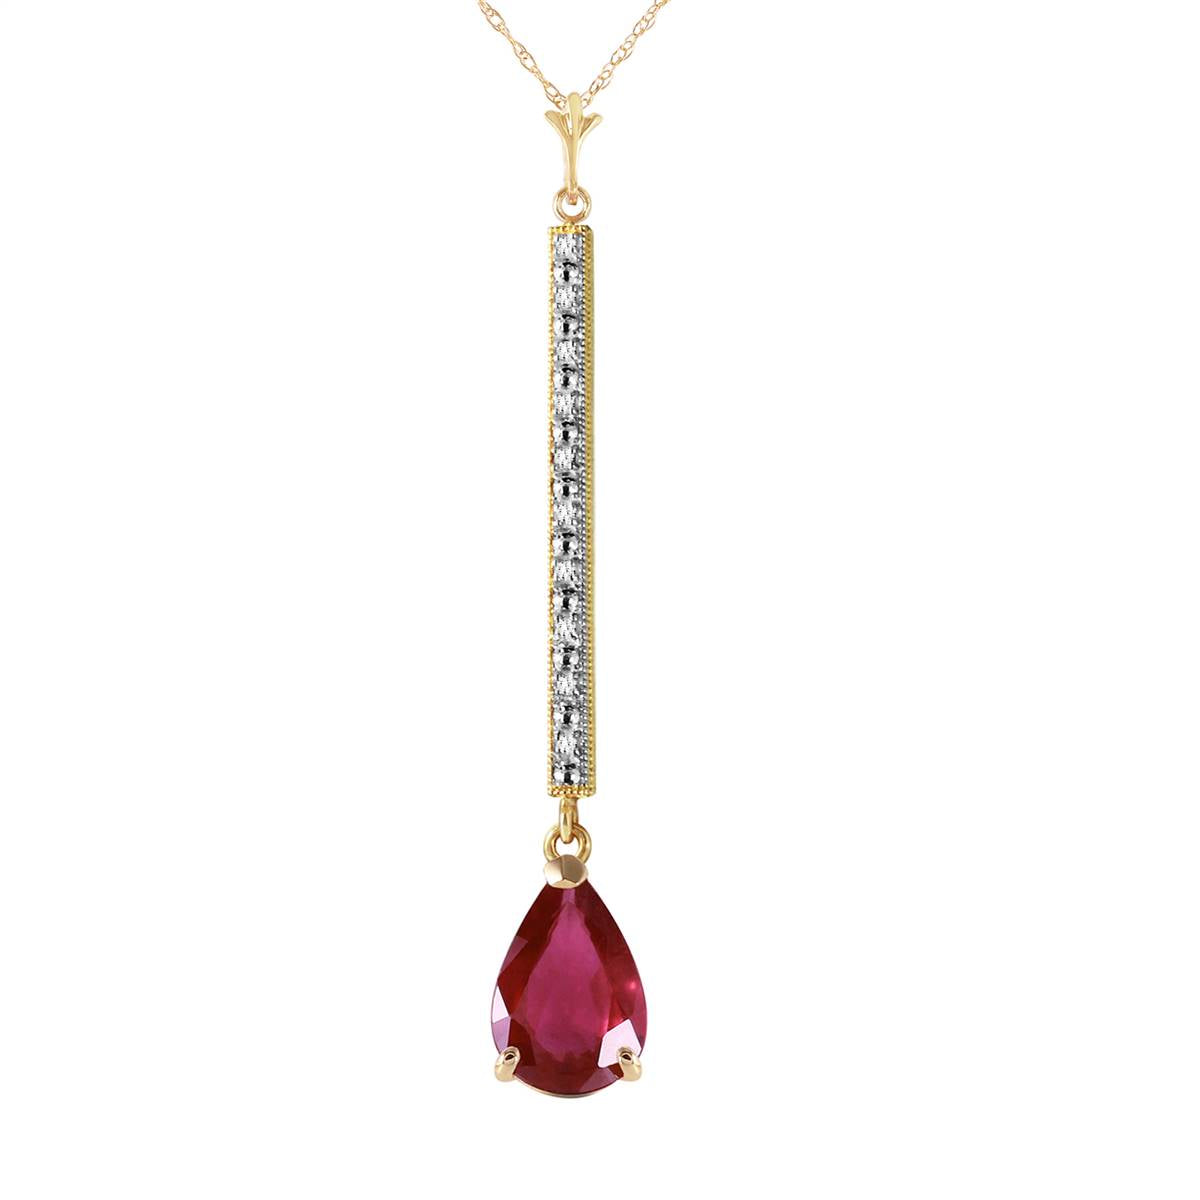 1.8 Carat 14K Solid Yellow Gold Necklace Diamond Ruby